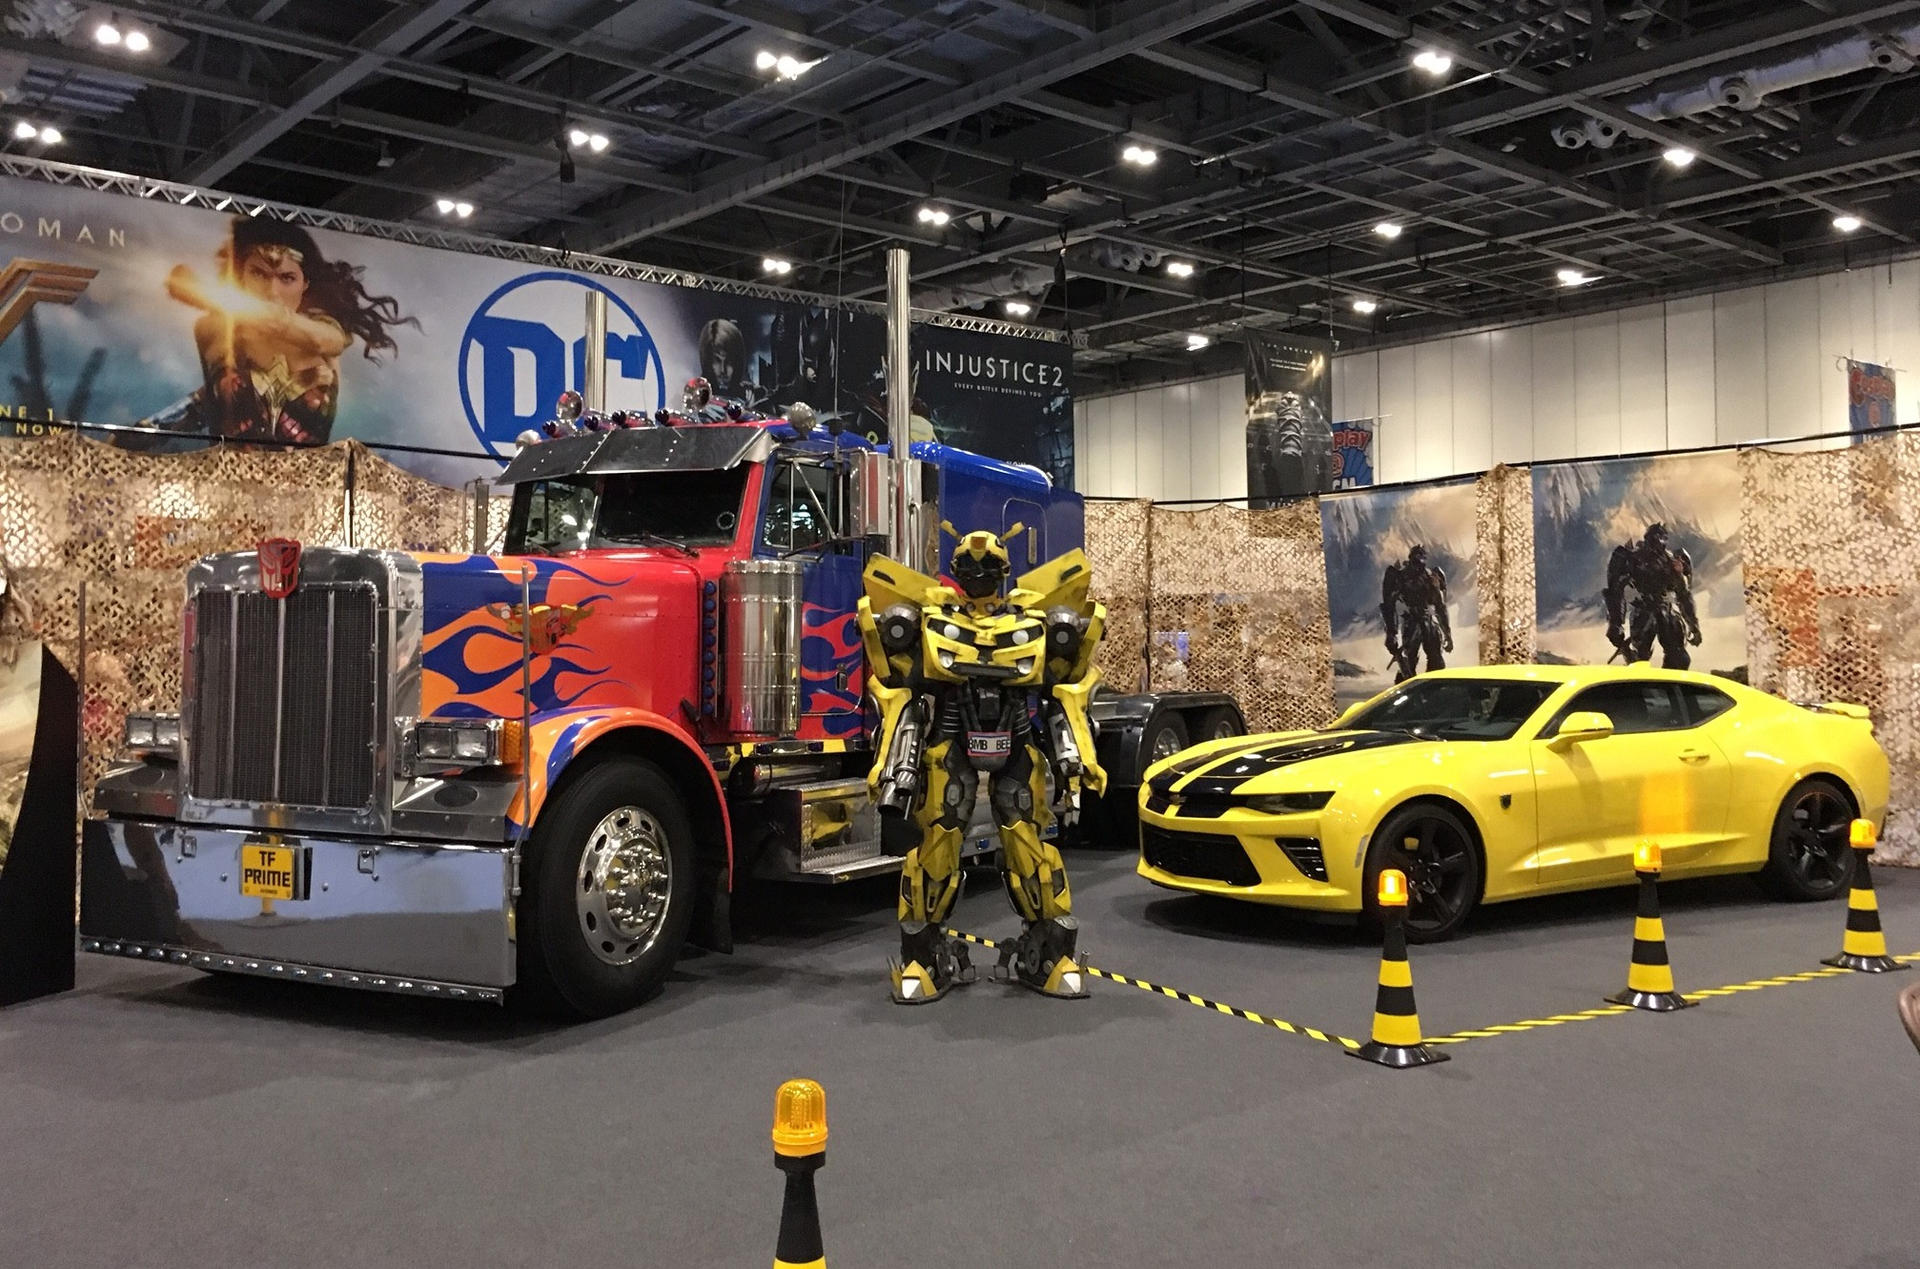 Optimus Prime and Bumblebee at MCM by rlkitterman on DeviantArt